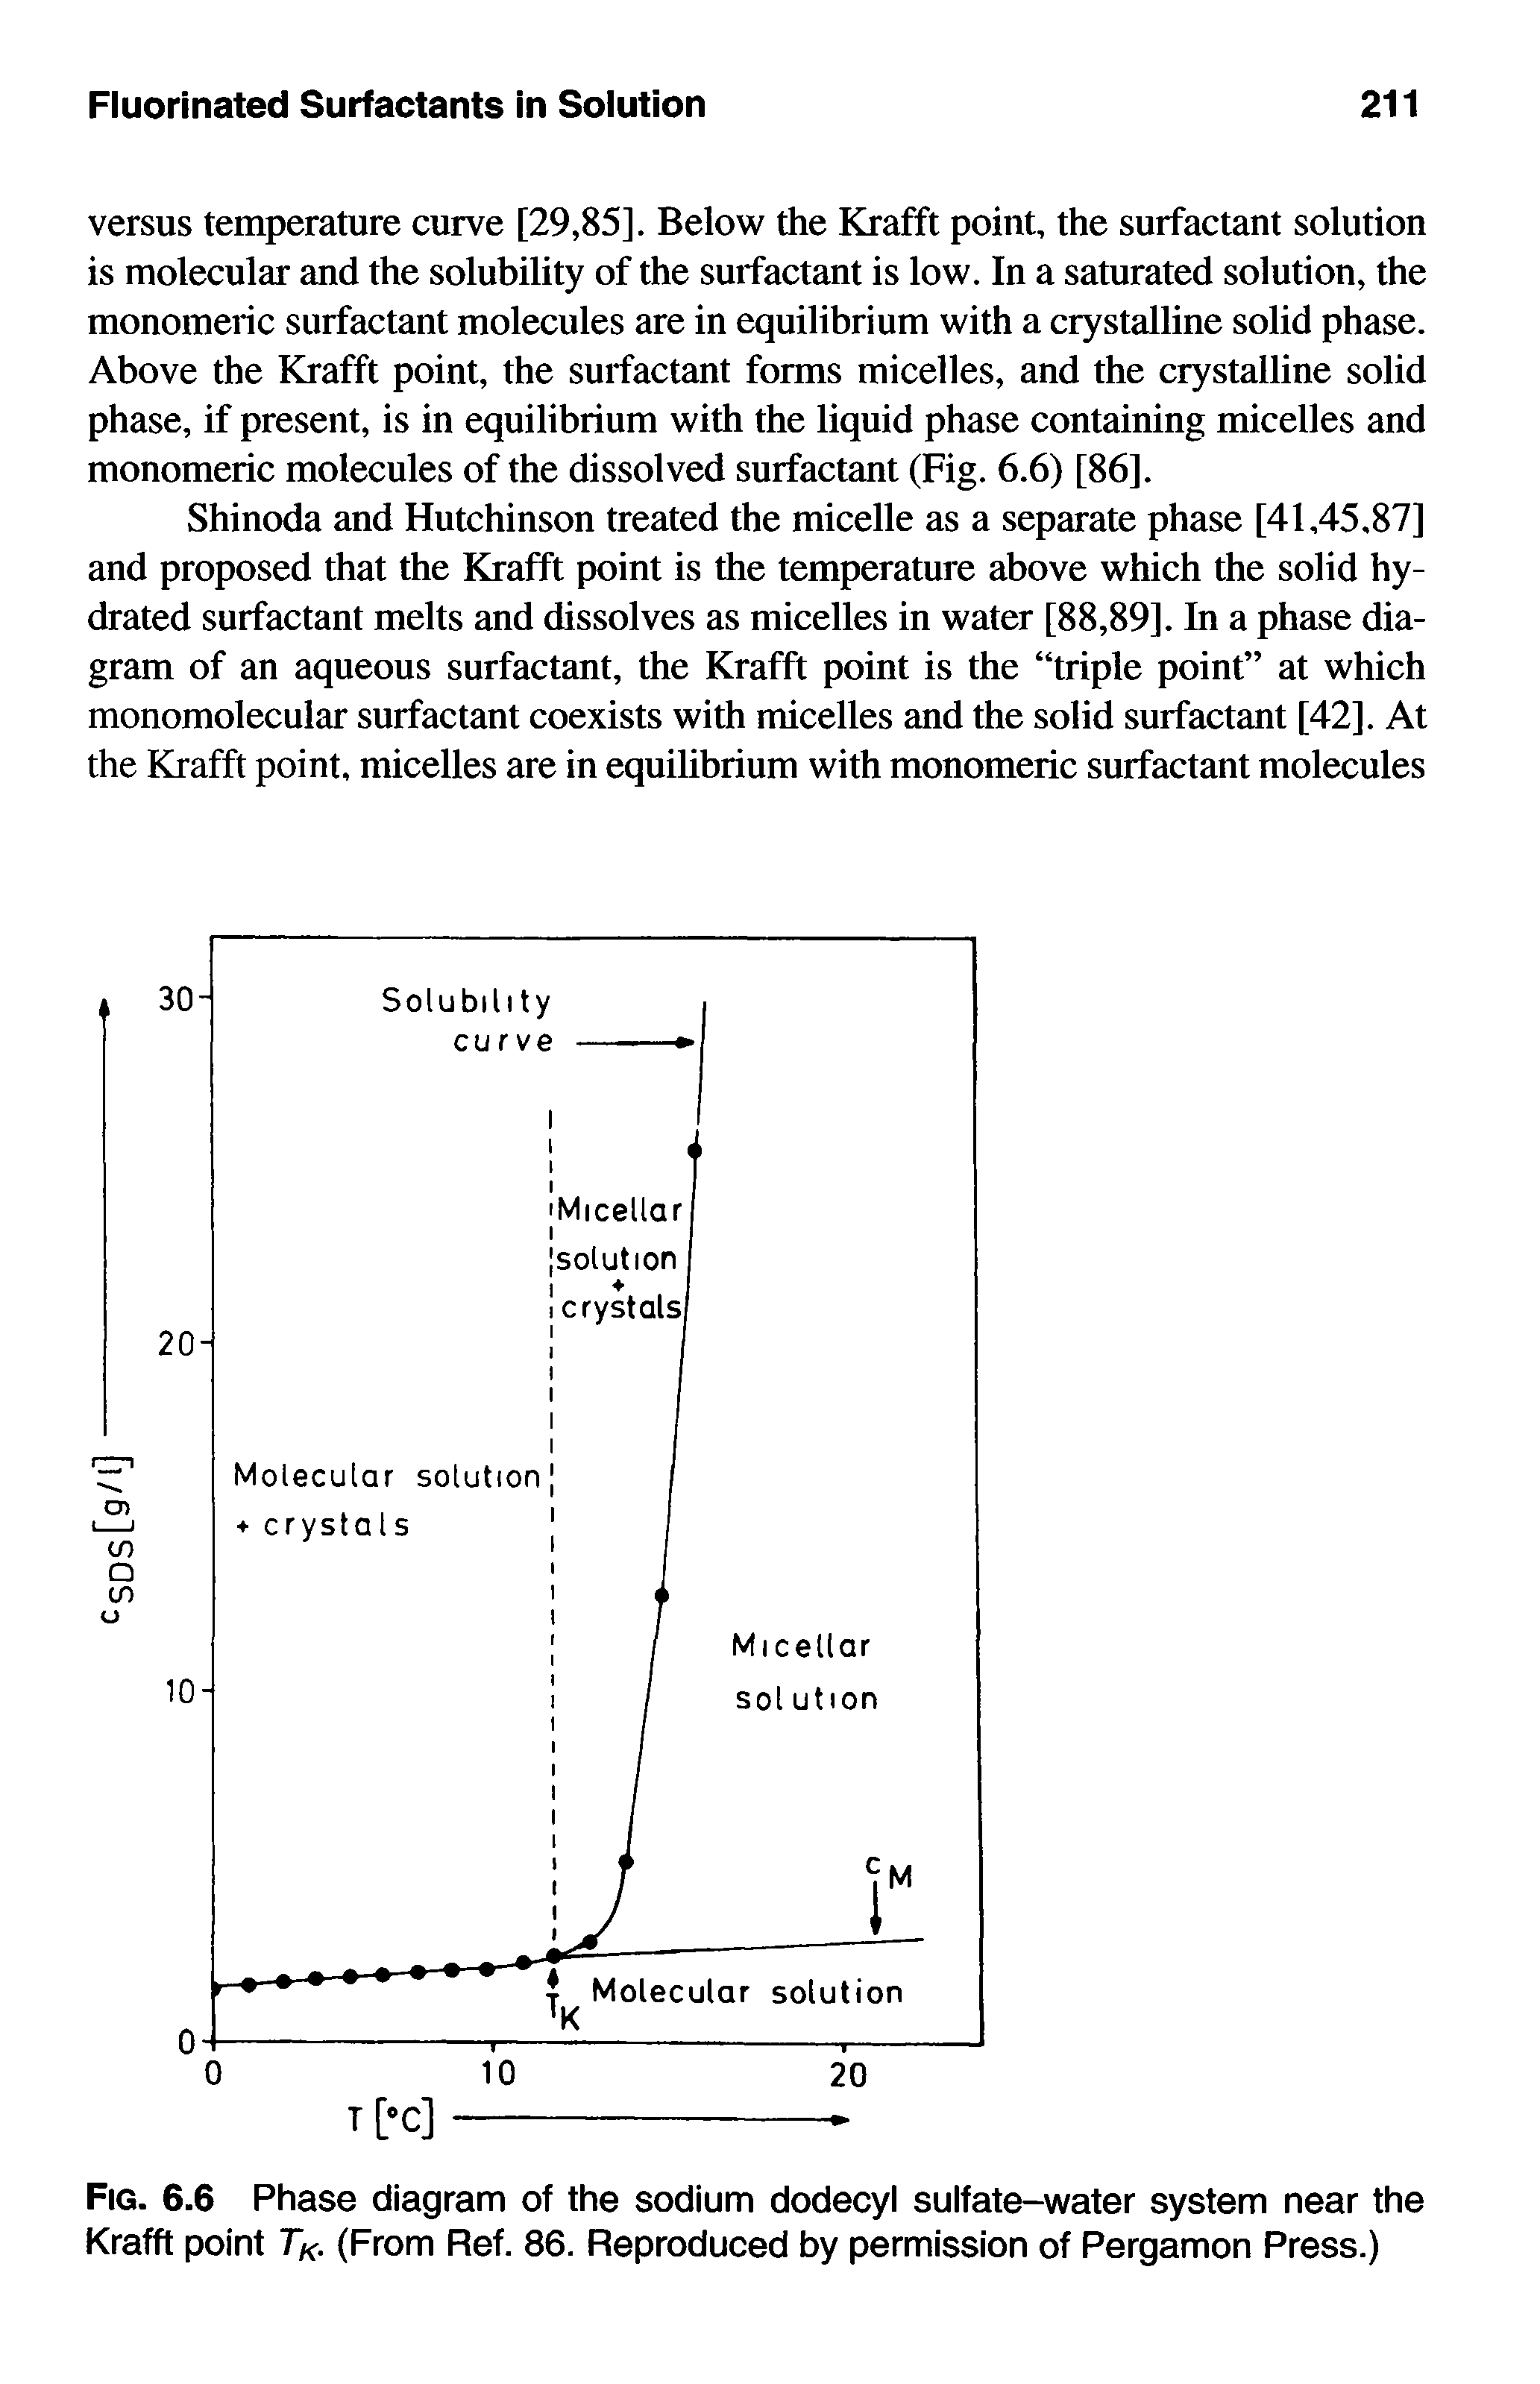 Fig. 6.6 Phase diagram of the sodium dodecyl sulfate-water system near the Krafft point Tk. (From Ref. 86. Reproduced by permission of Pergamon Press.)...